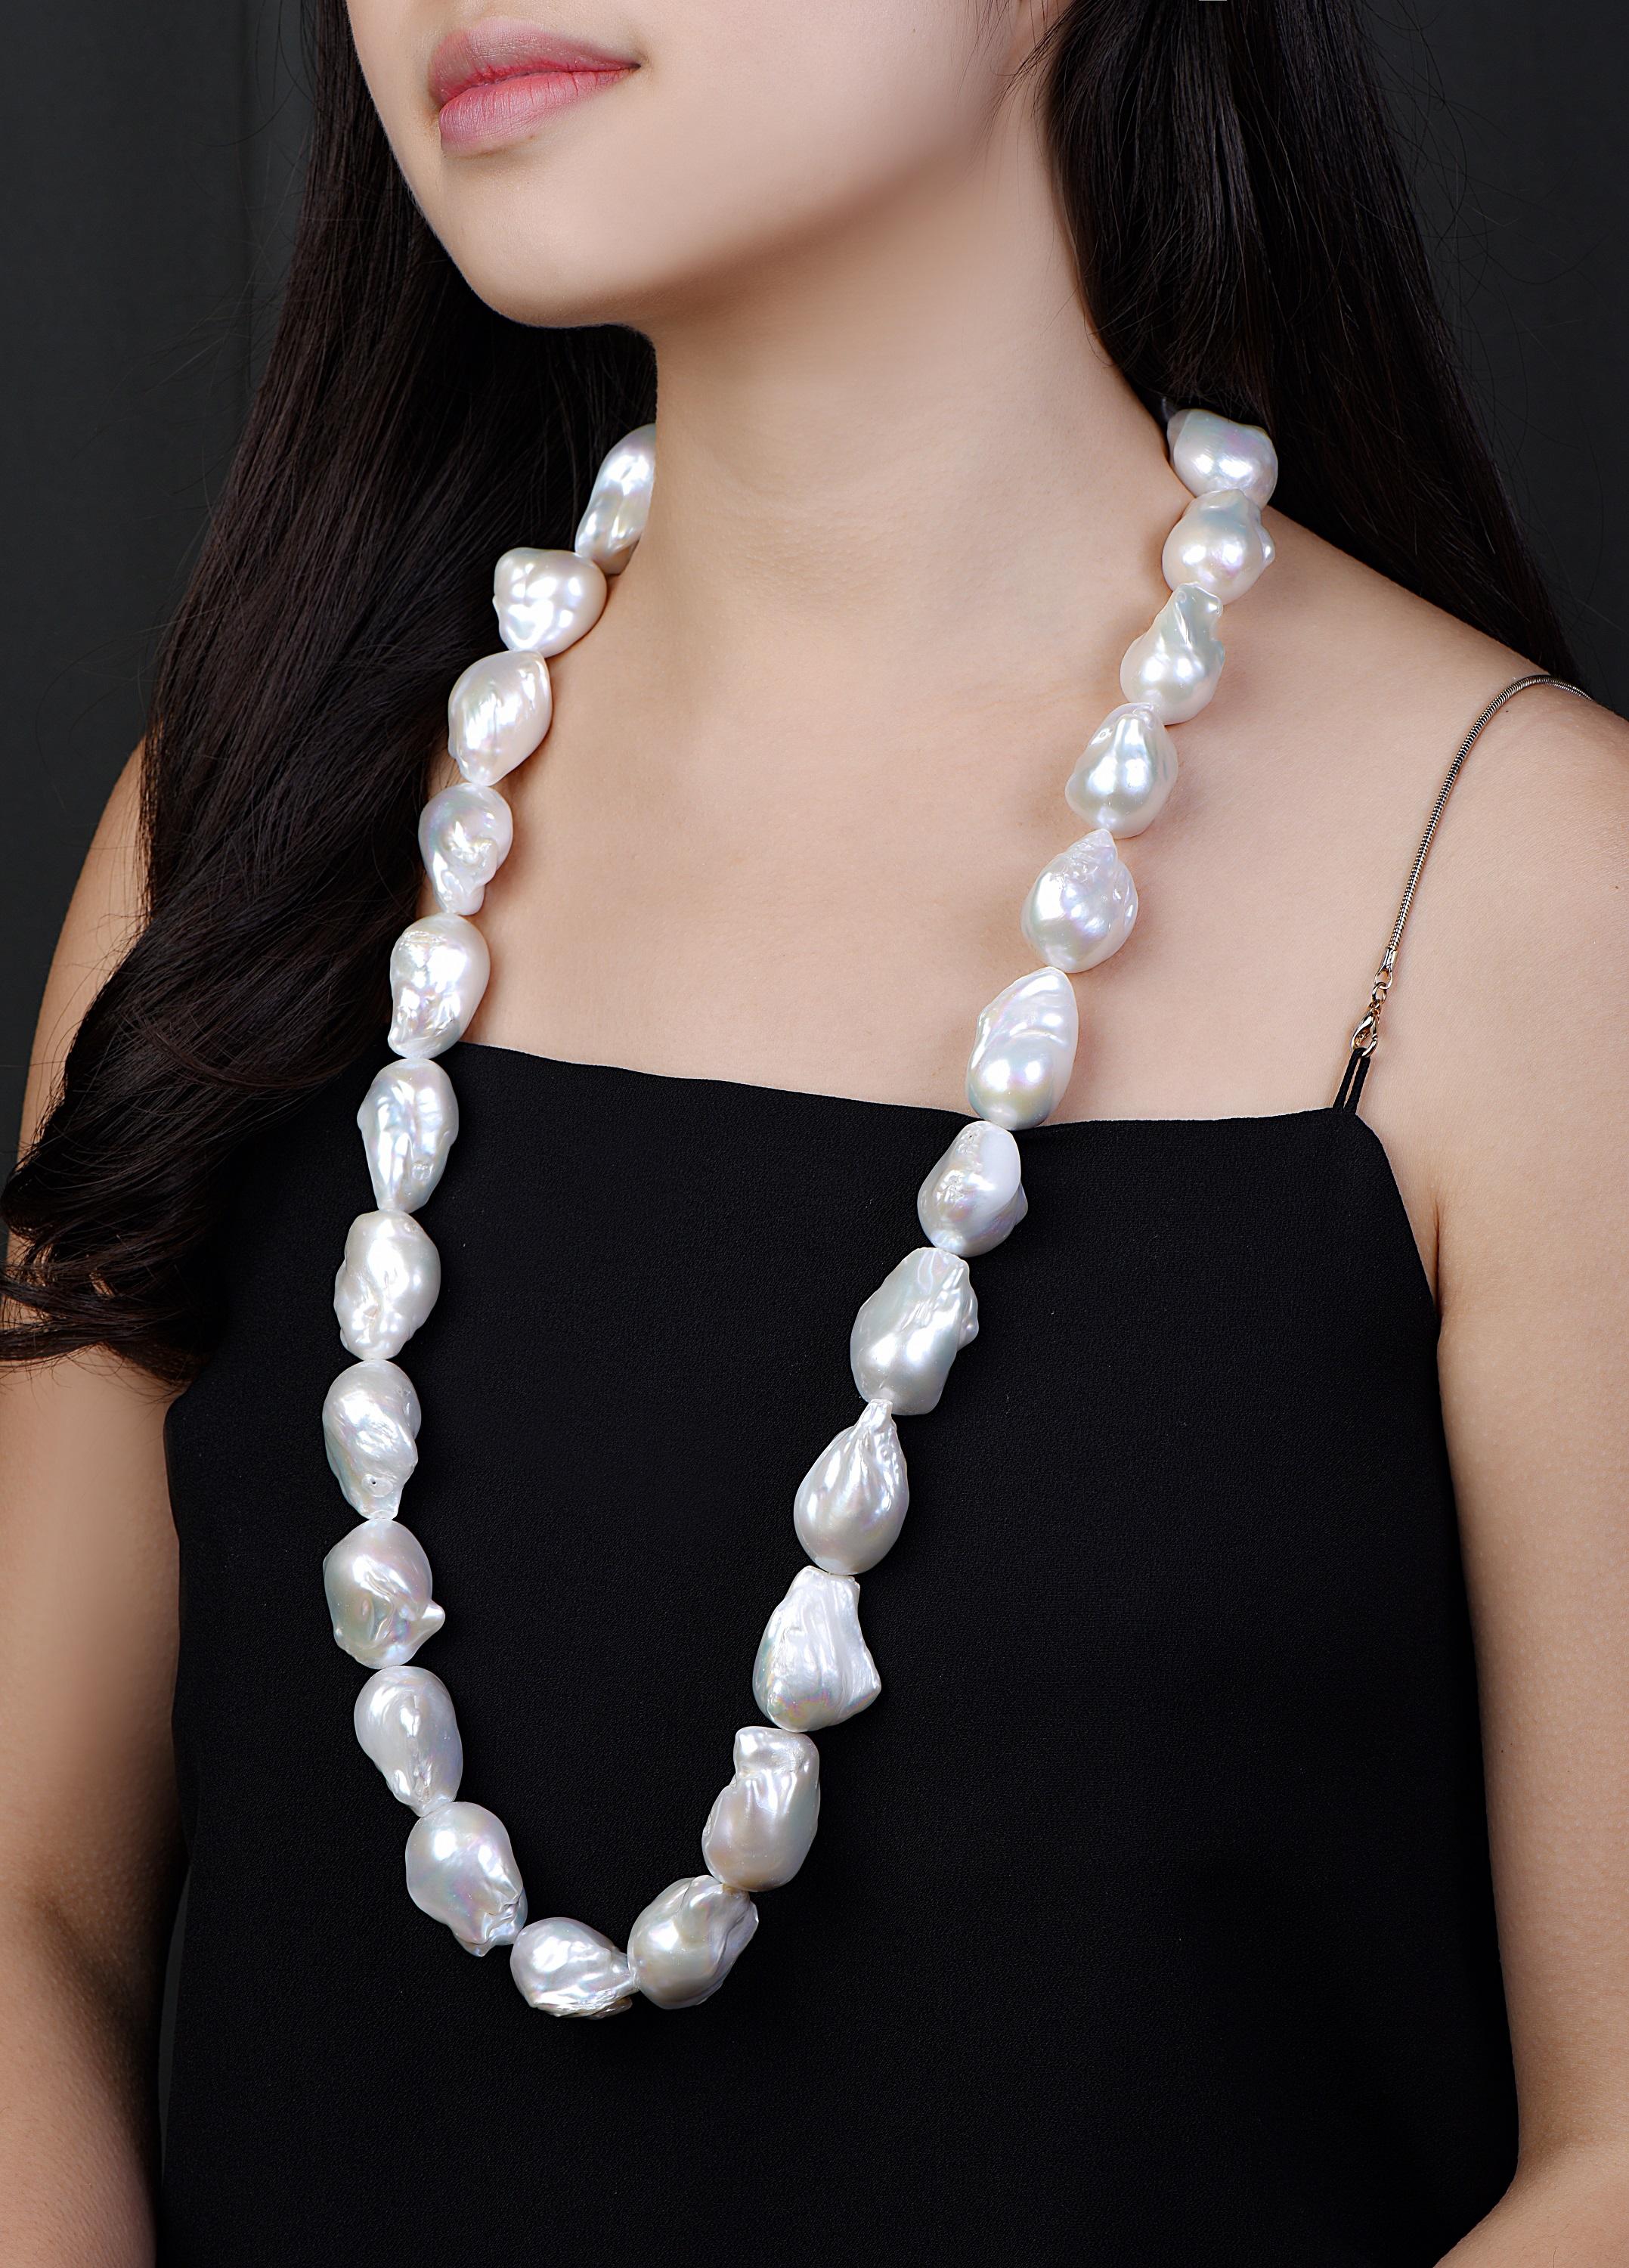 This large sized strand of pearls with sizes from 16-19mm at the clasp to a center front pearl. All pearls are semi baroque in shape and very evenly matched in their luster, and unique organic shapes. The pearls come from the pearl producing area of